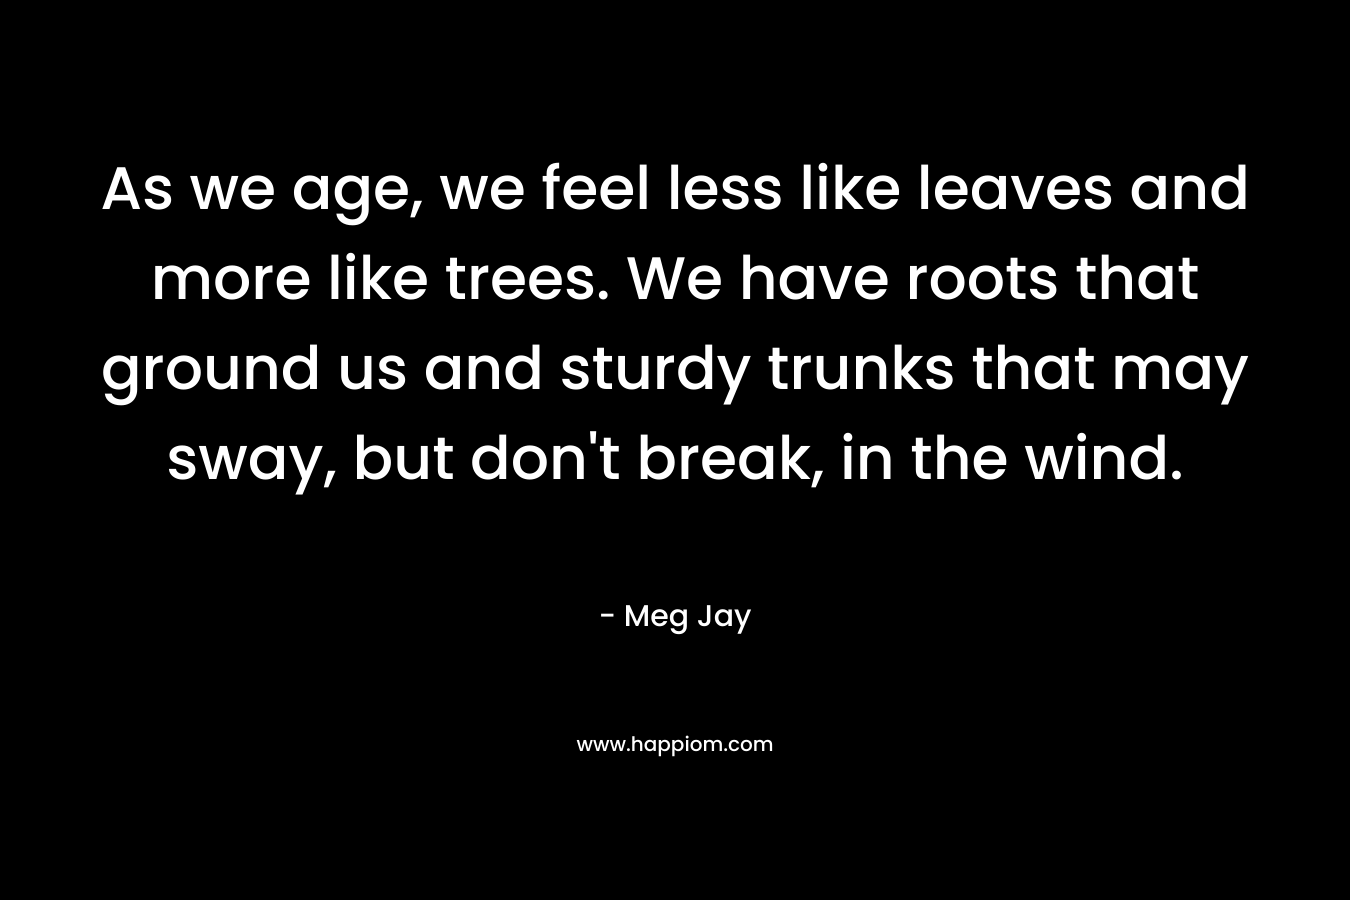 As we age, we feel less like leaves and more like trees. We have roots that ground us and sturdy trunks that may sway, but don’t break, in the wind. – Meg Jay